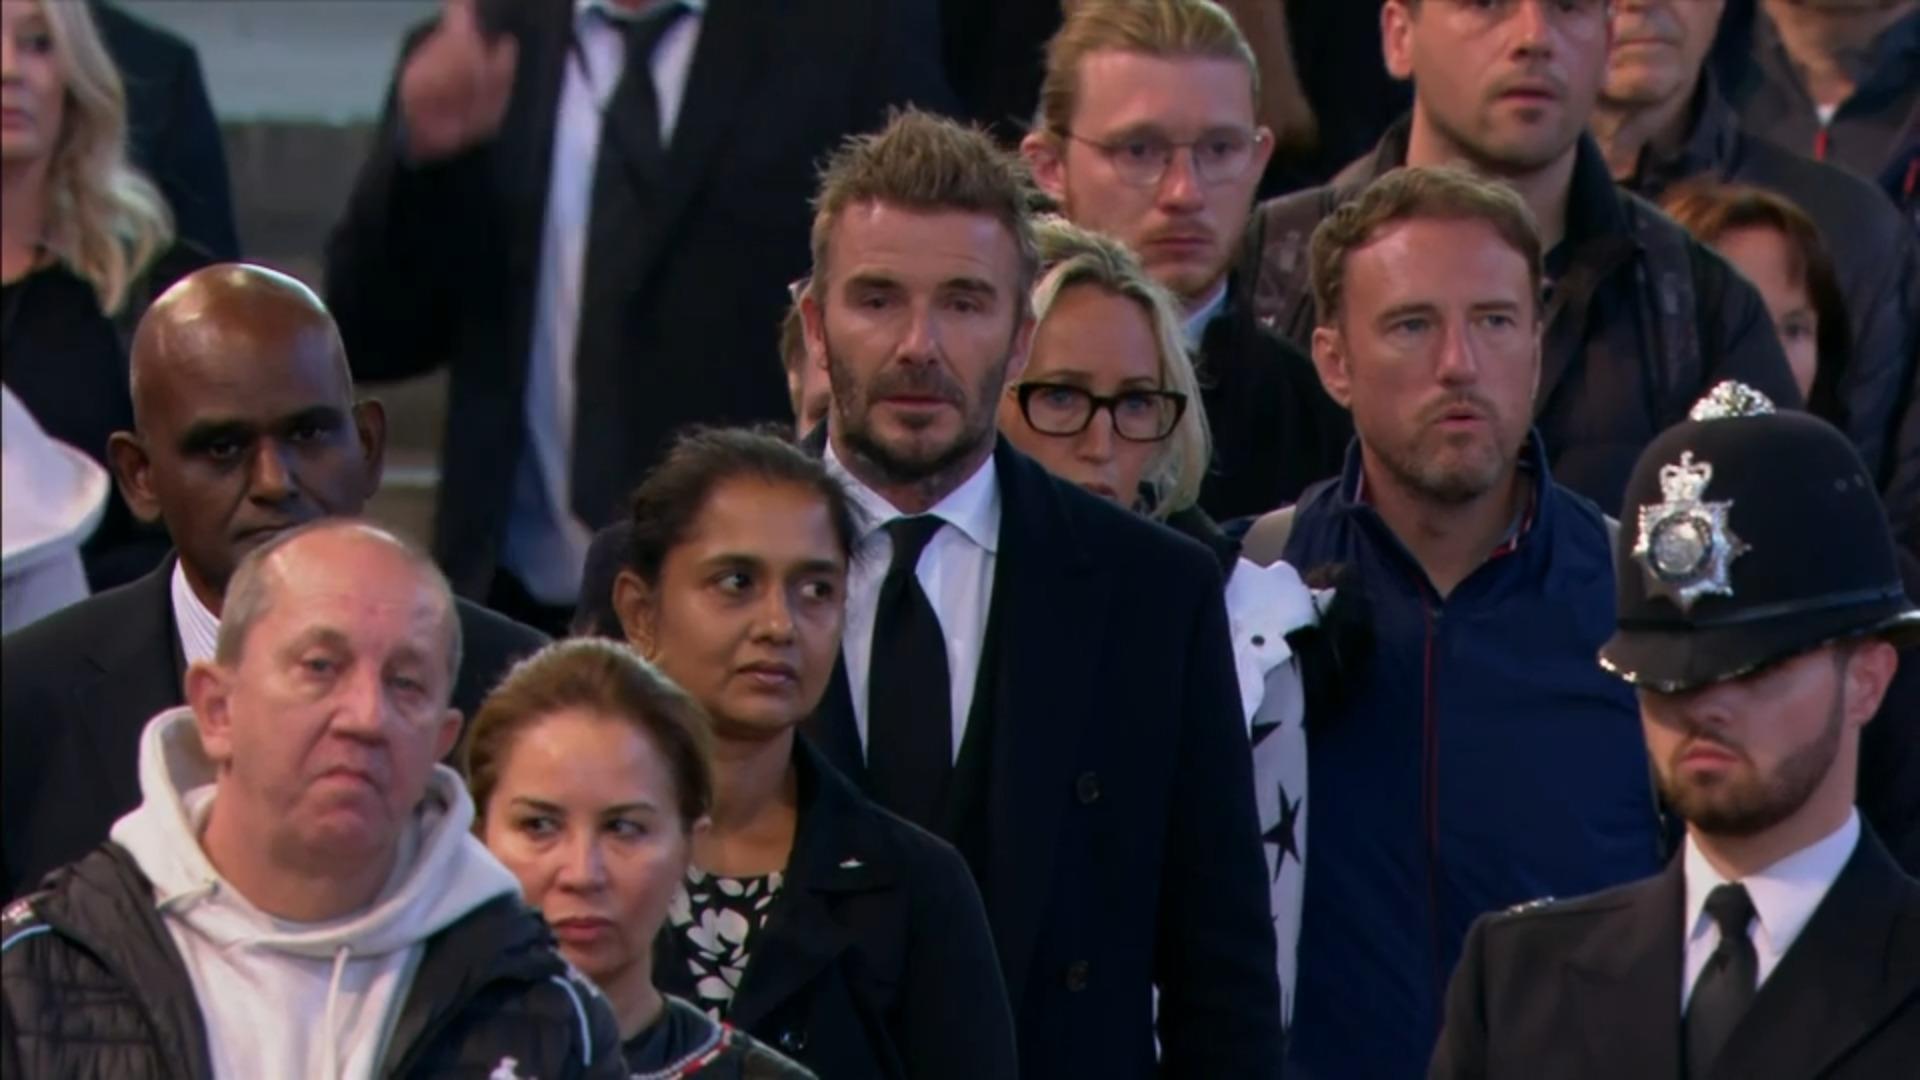 World football star David Beckham waits in front of the Queen's coffin.  he has been waiting since 2 o'clock